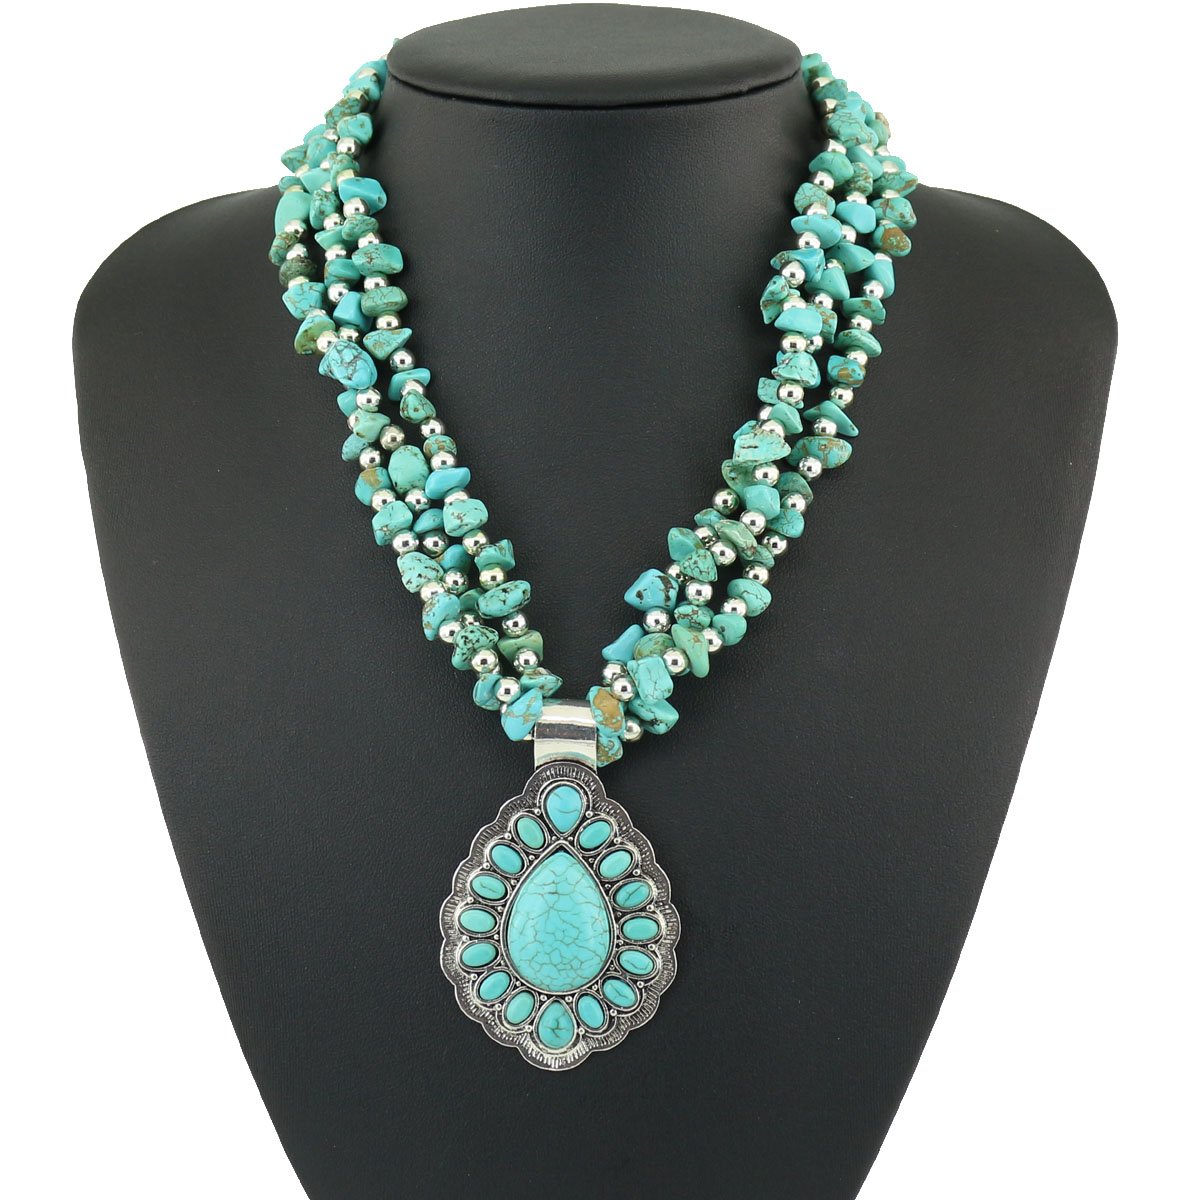 jianxi Vintage Alloy Synthetic Turquoise Necklace Fashion Jewelry Women